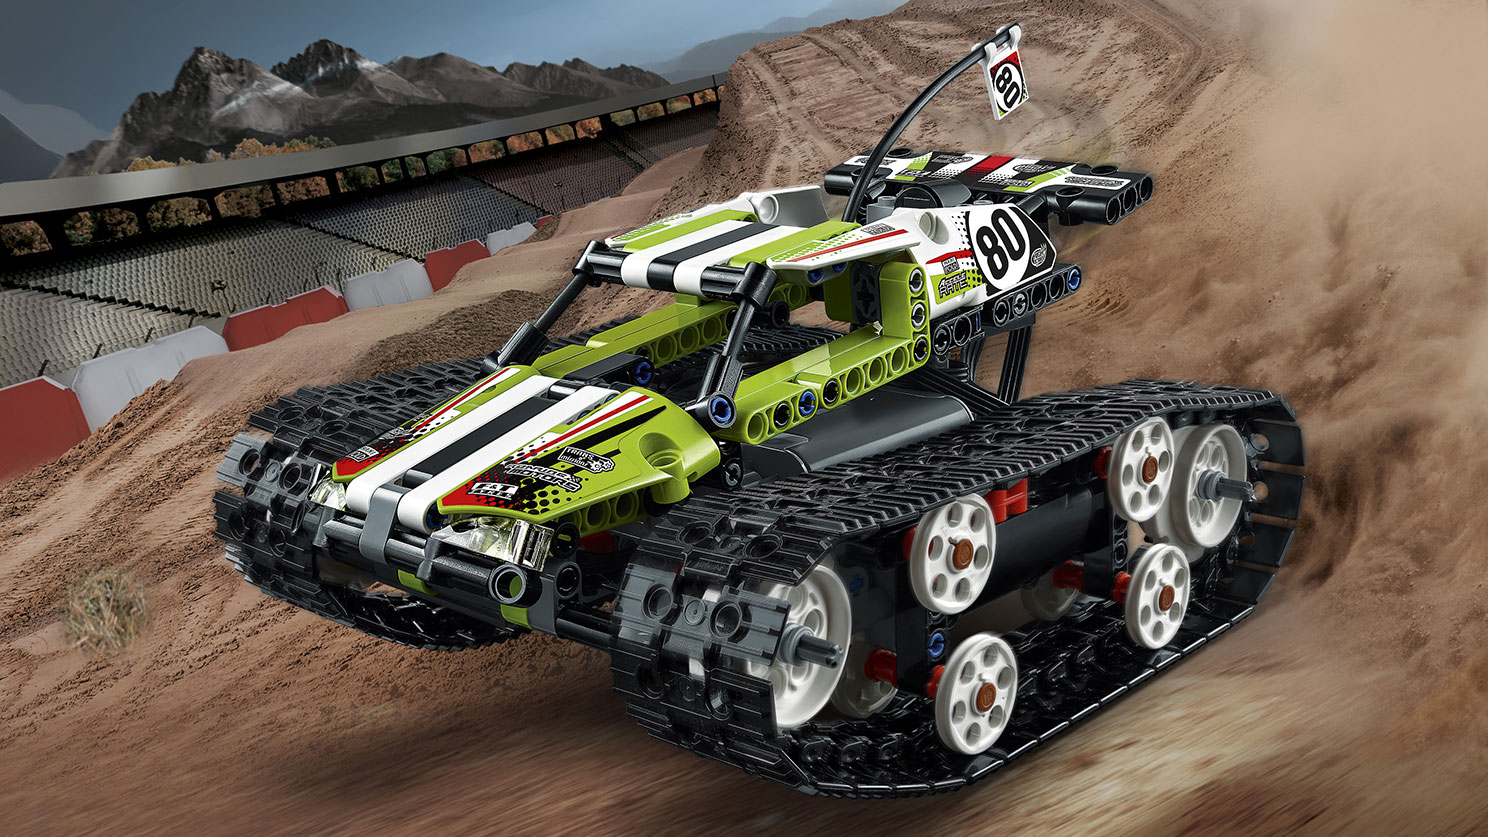 LEGO 42065 Technic "RC Tracked Racer" Building Toy Remote Control Vehicle 